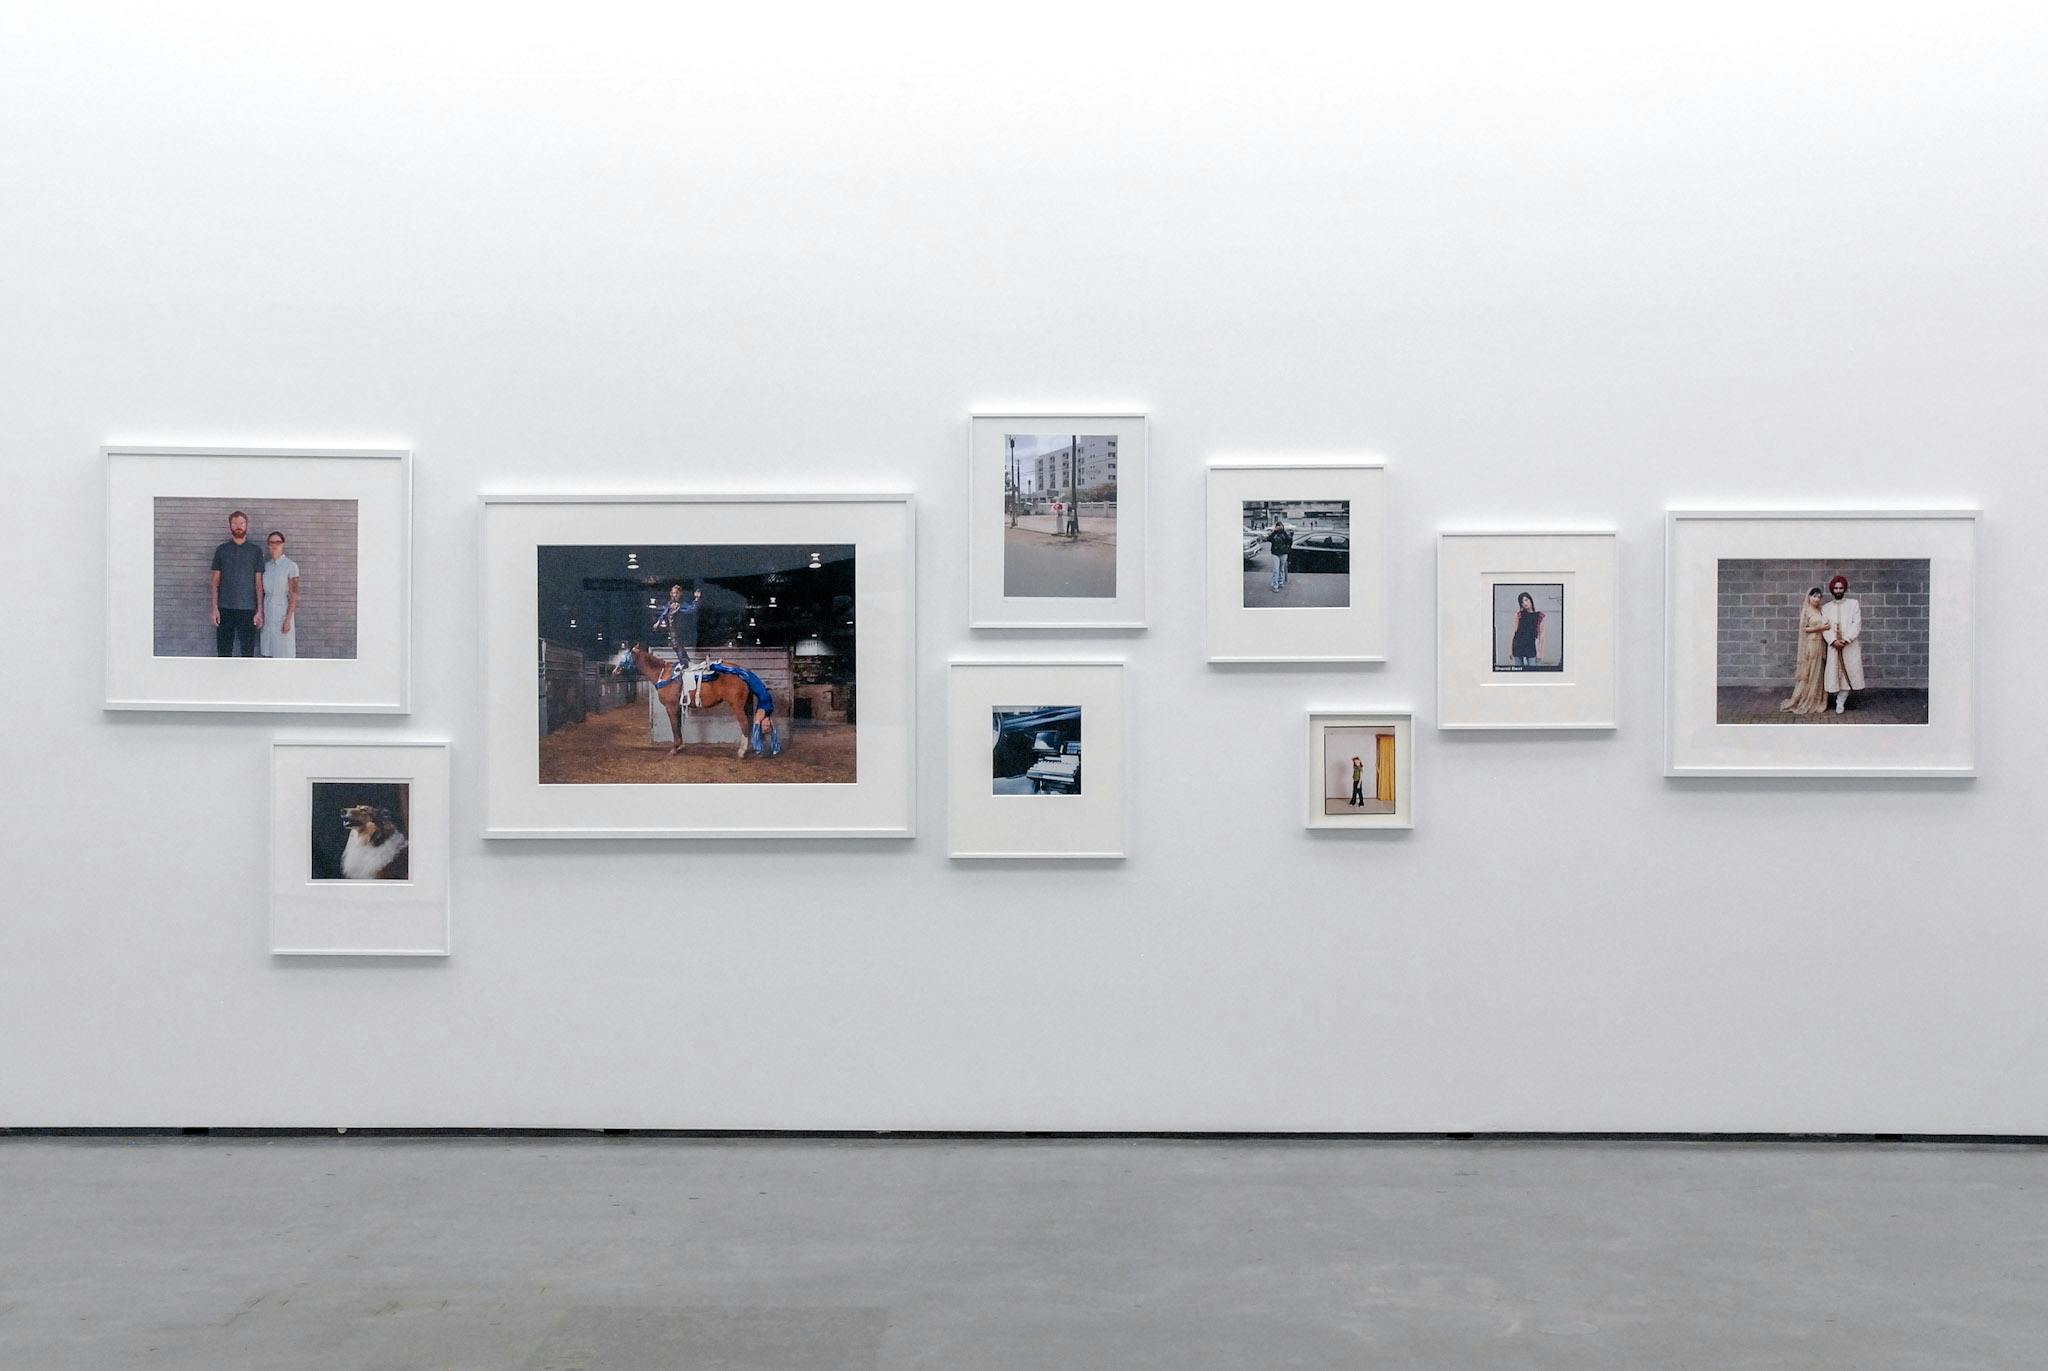 This image shows a series of various-sized photographs installed on a gallery wall. Some of them are street snaps, and others are human and animal portraits. All photos are white framed.